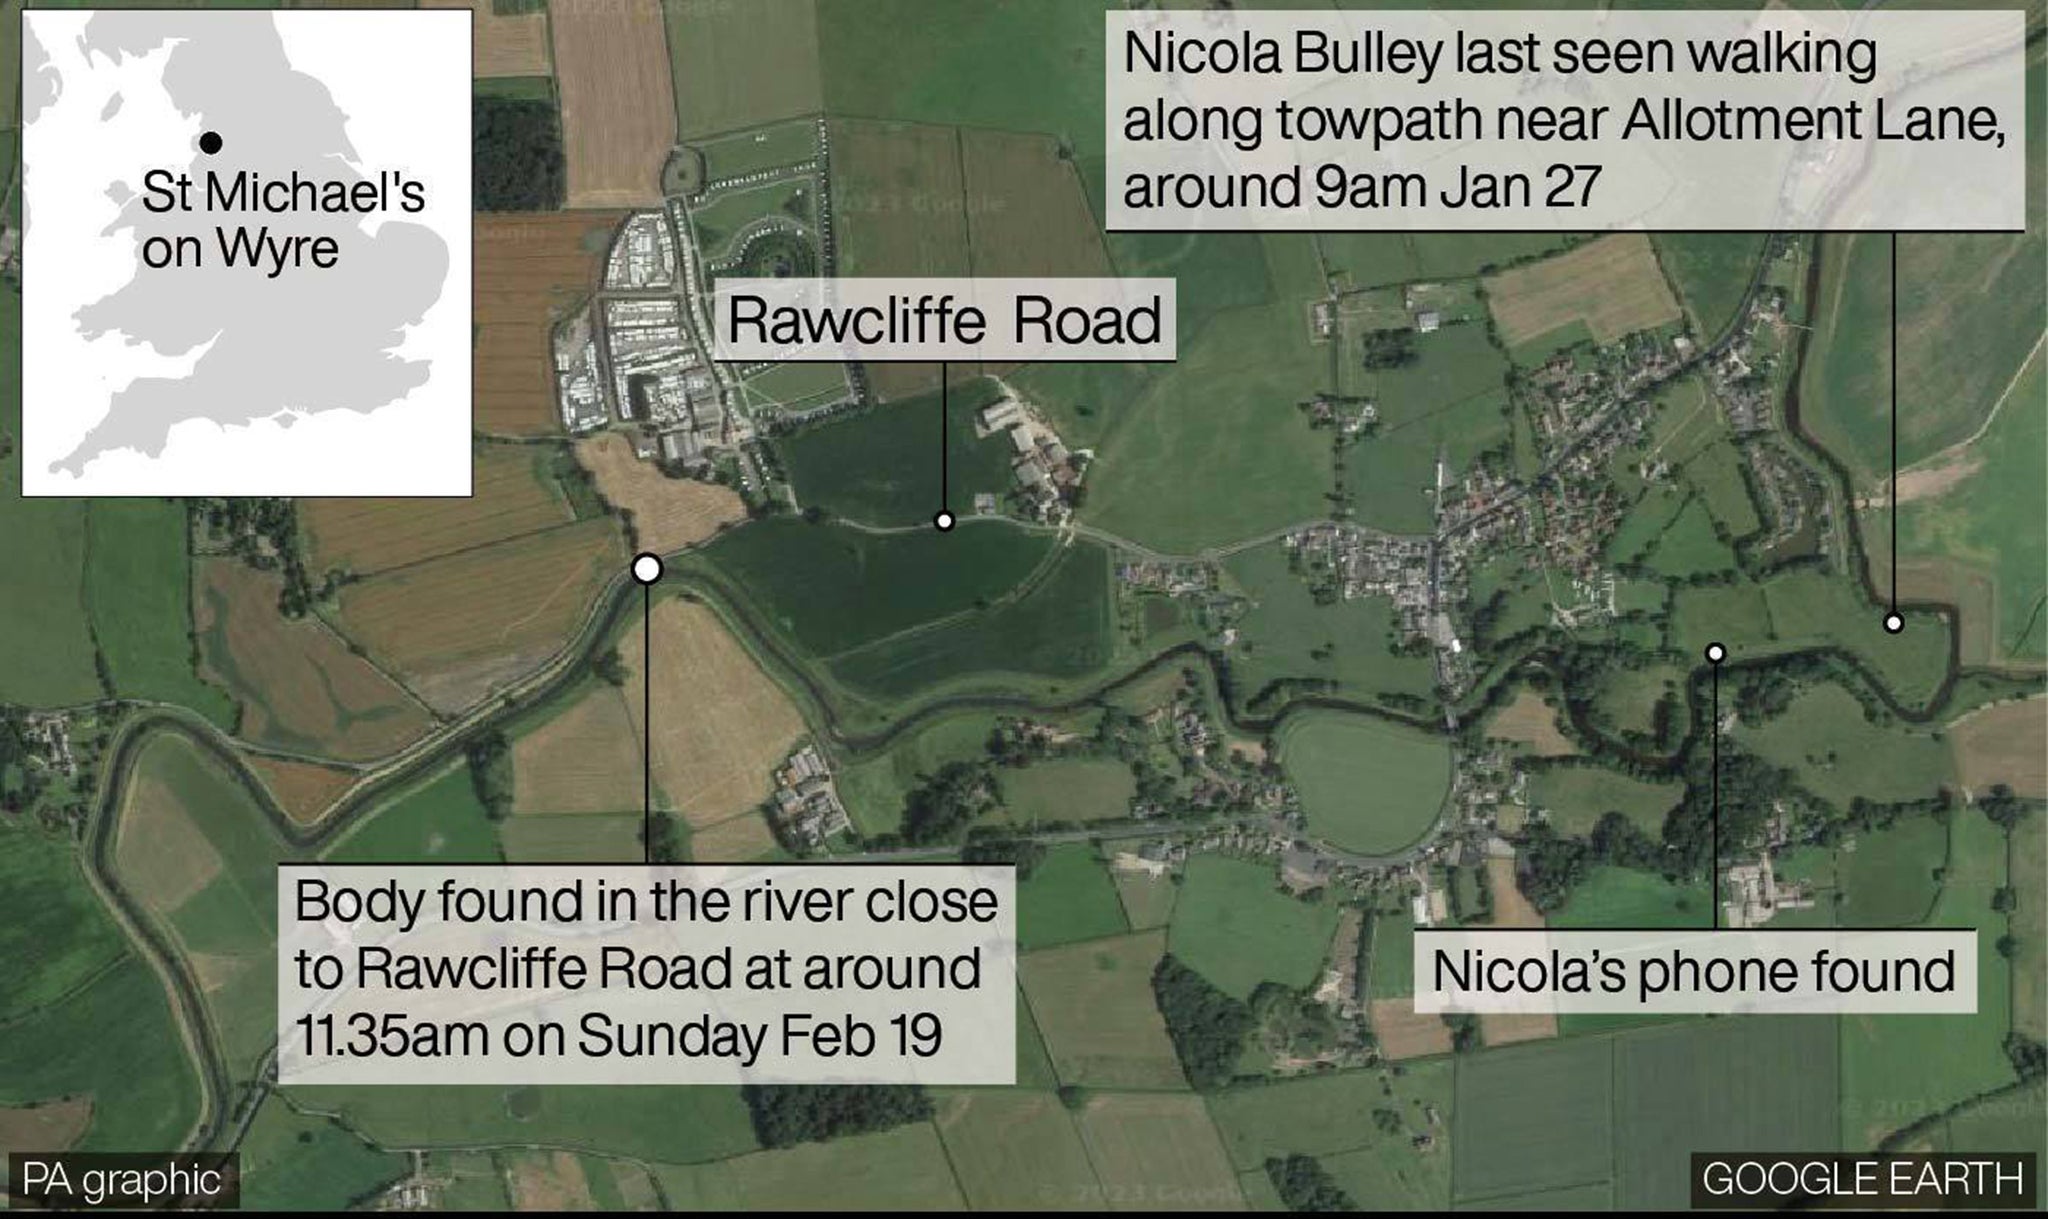 A map showing the exact location where a body in the search for missing dog walker Nicola Bulley was found has been released